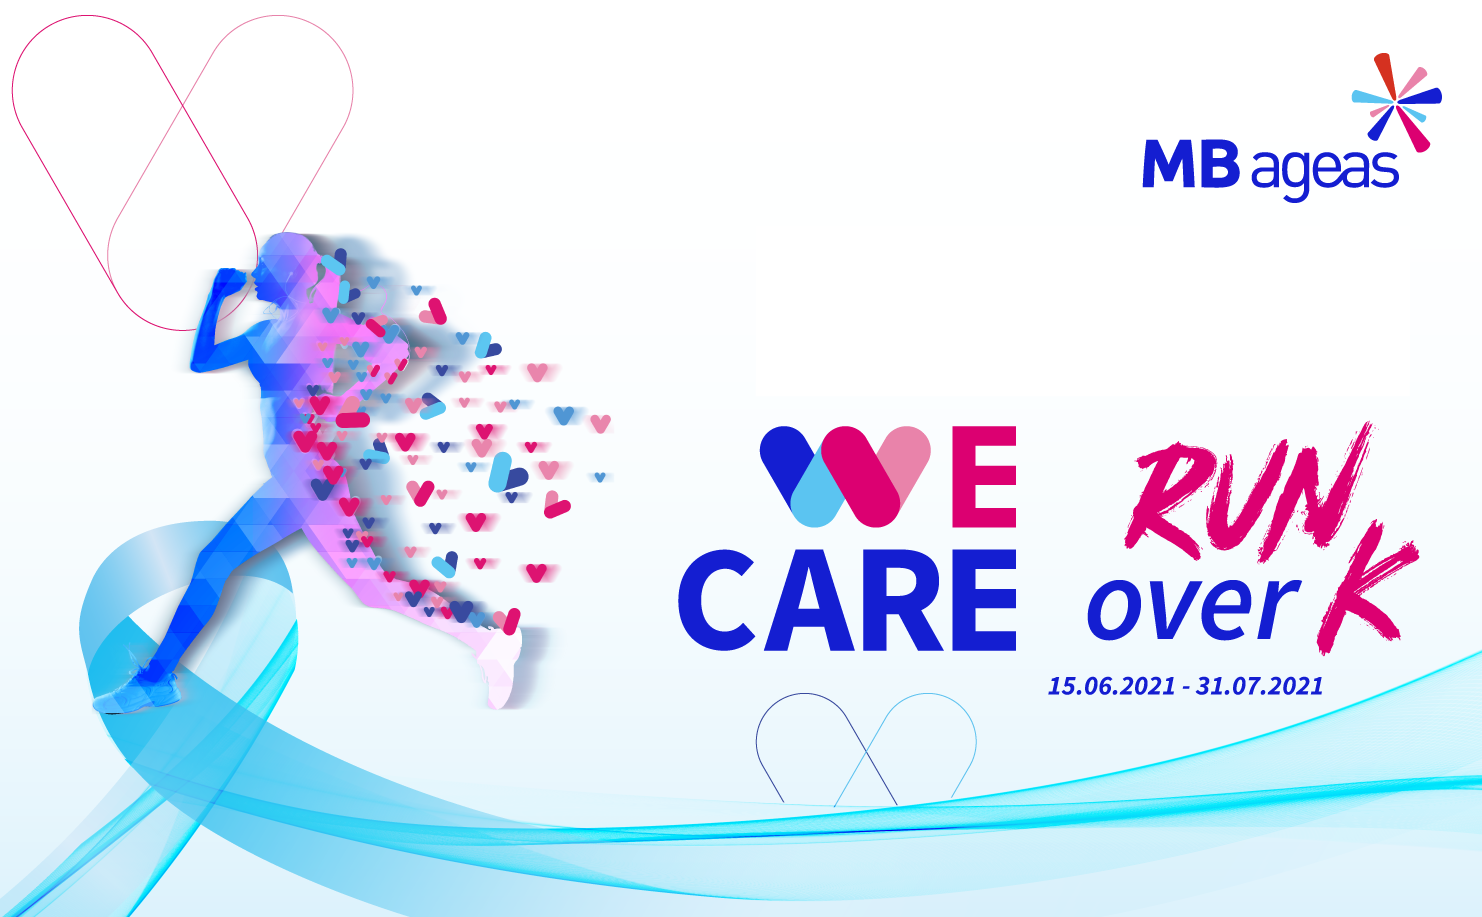 MB Ageas Life: We Care, We Promise, We Do